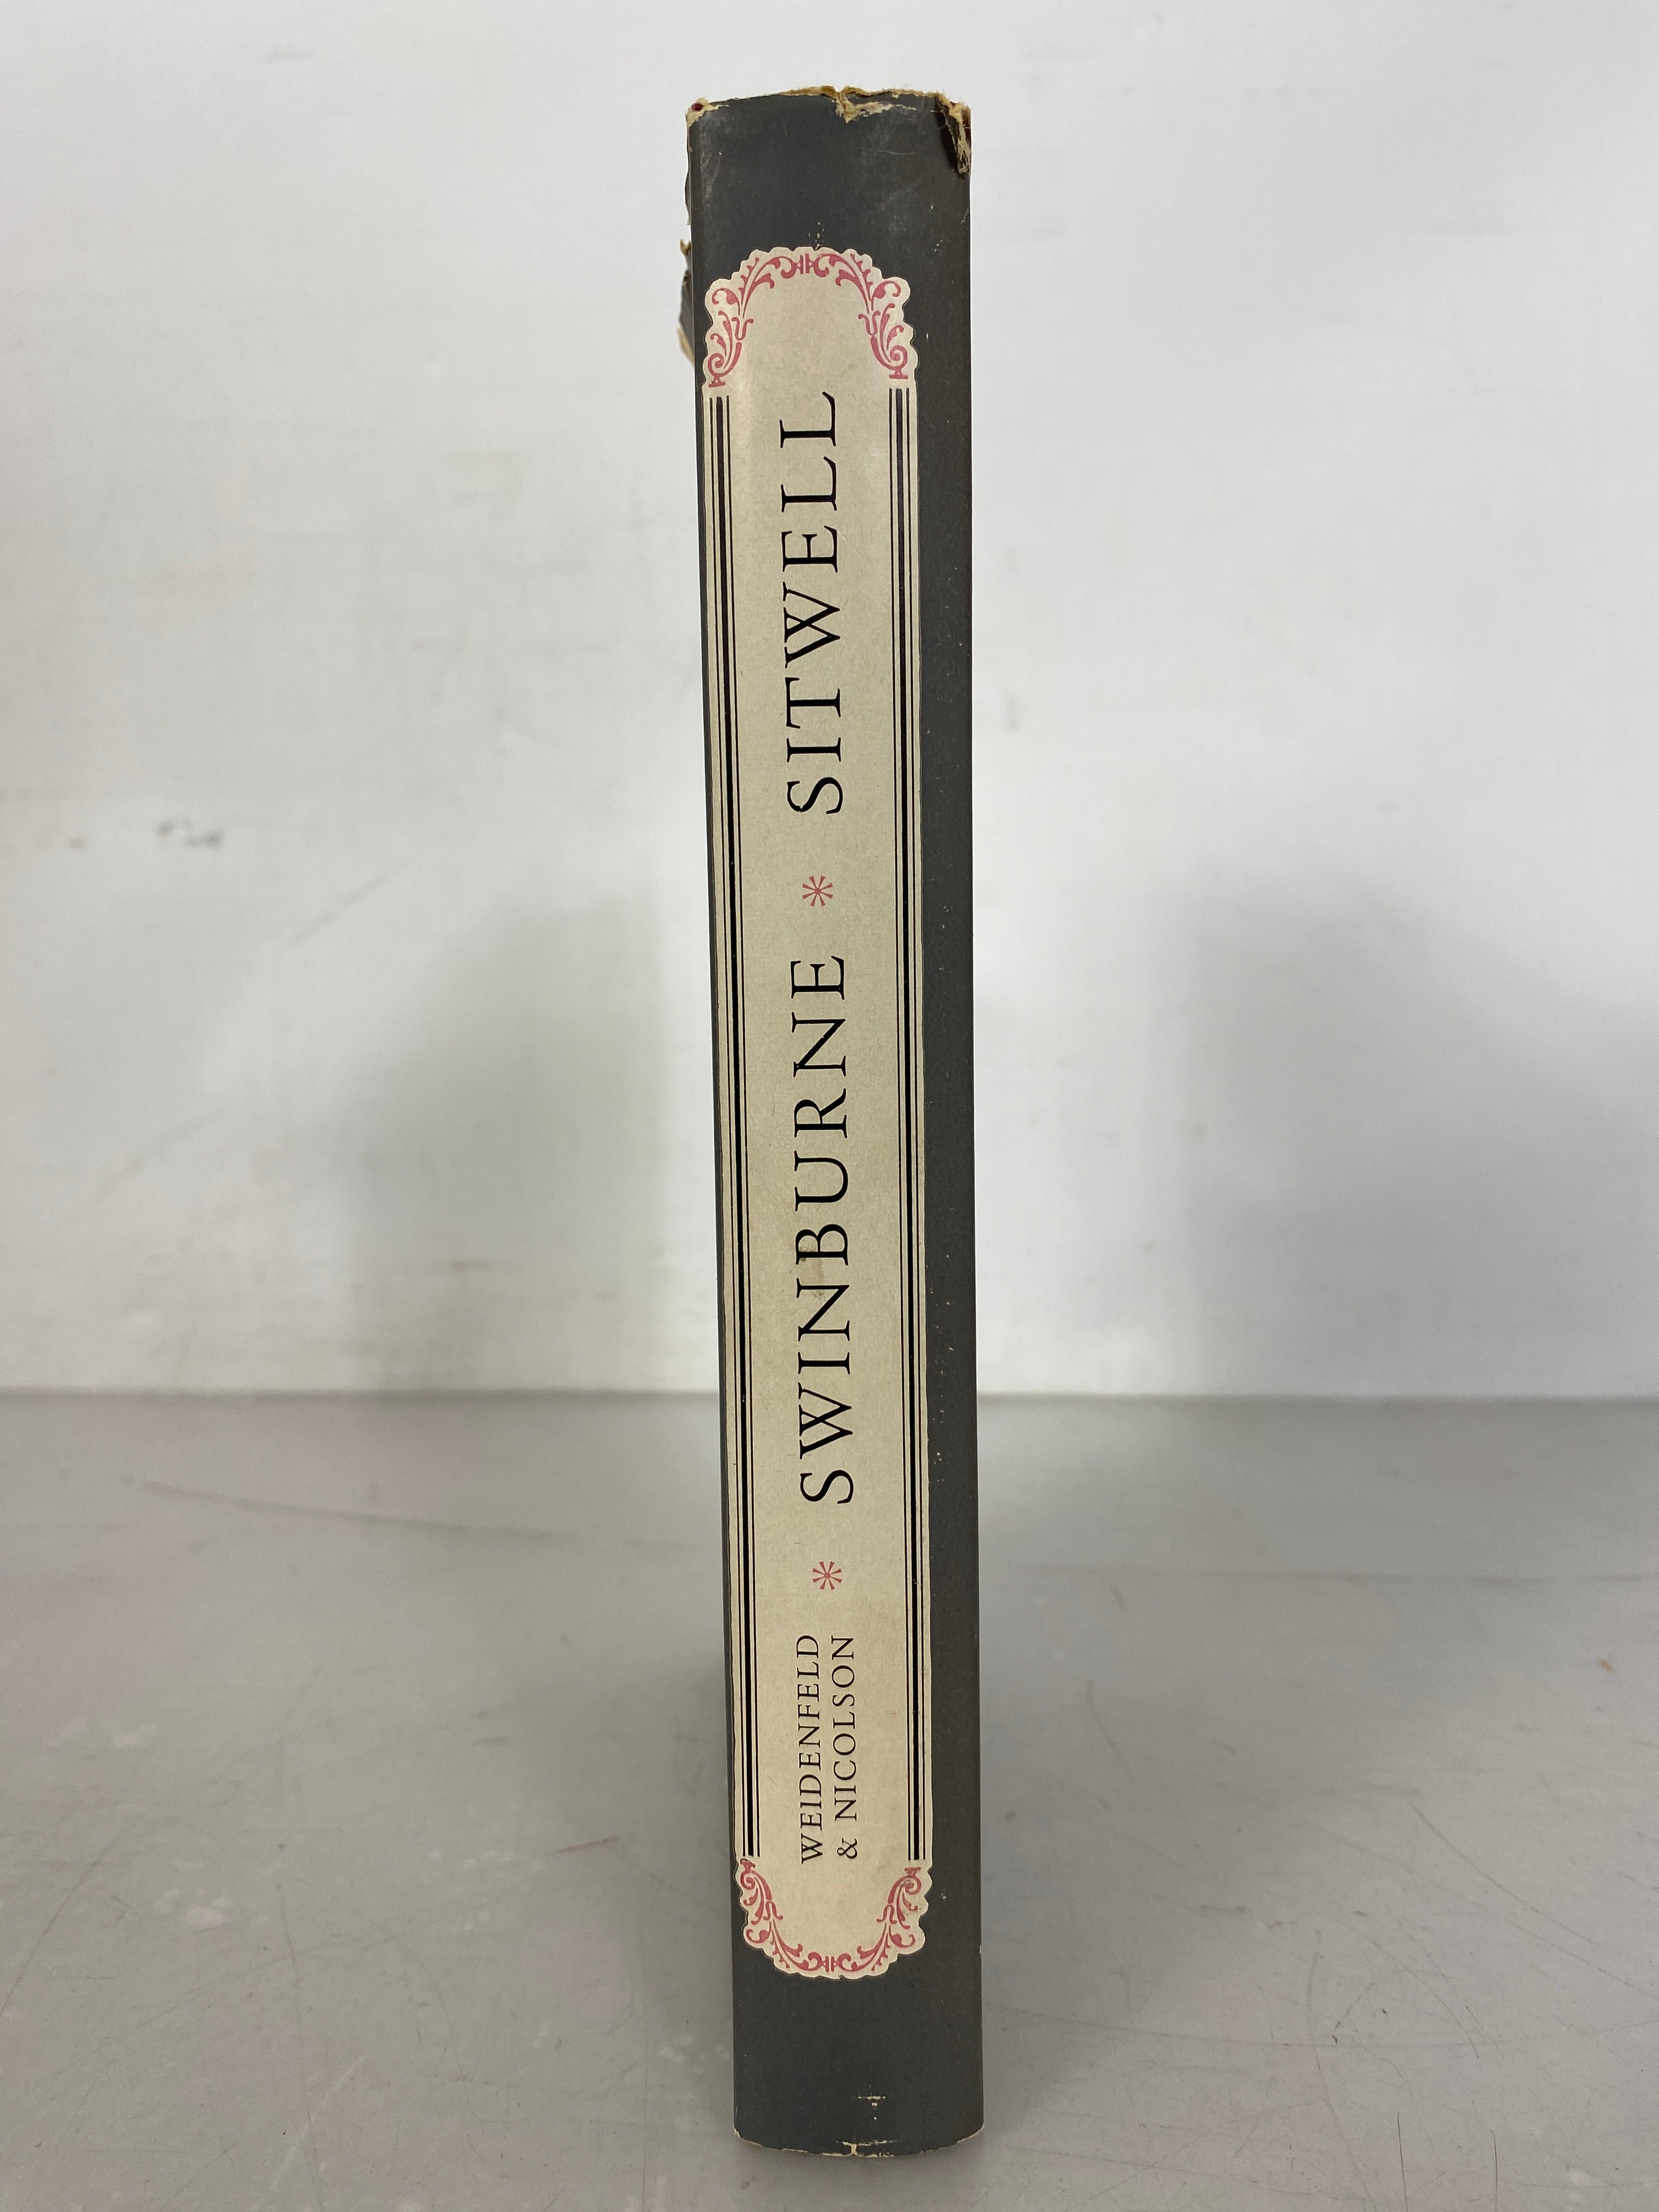 Swinburne A Selection Compiled by Dame Edith Sitwell 1960 HC DJ